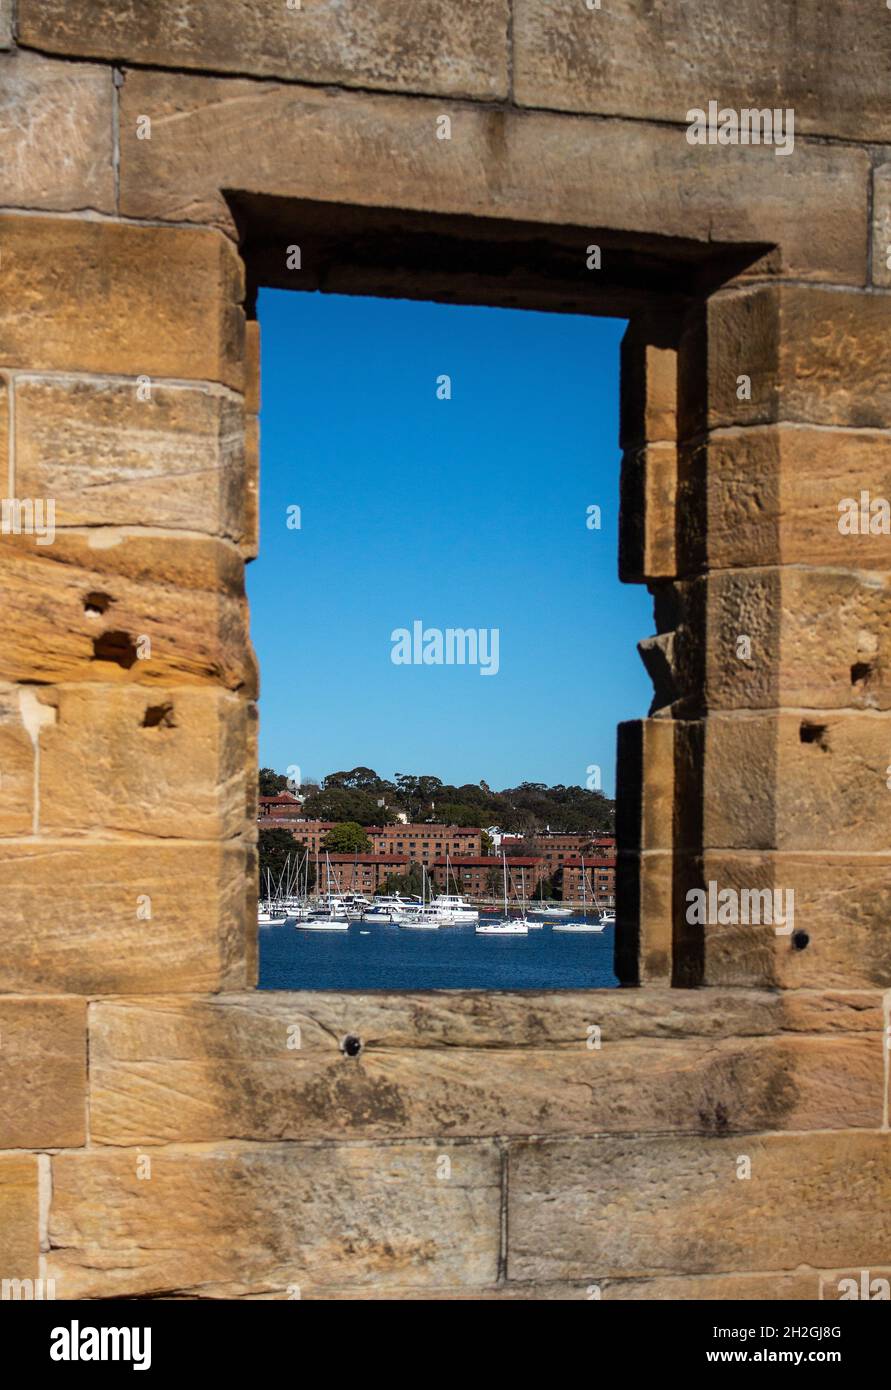 Sandstone brick wall with open window showing boats on water against blue sky Stock Photo